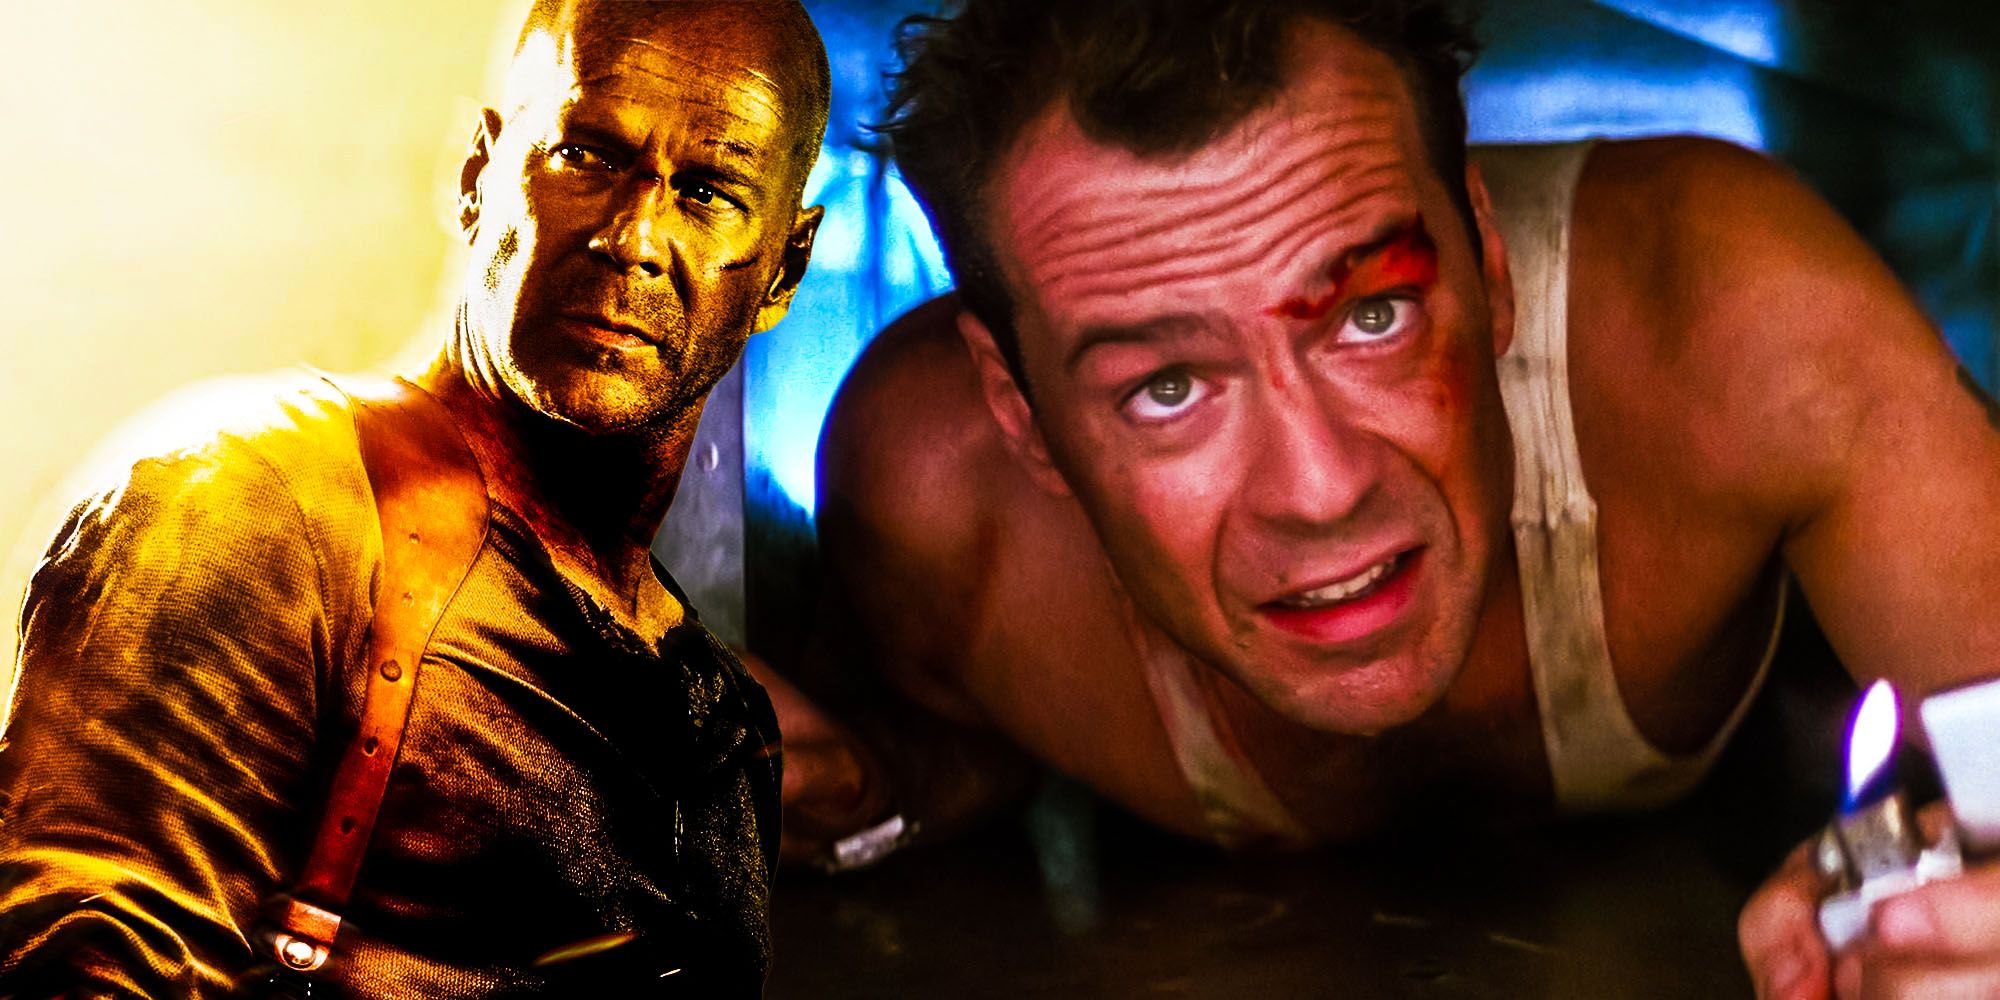 Too late for bruce willis to make another Die hard